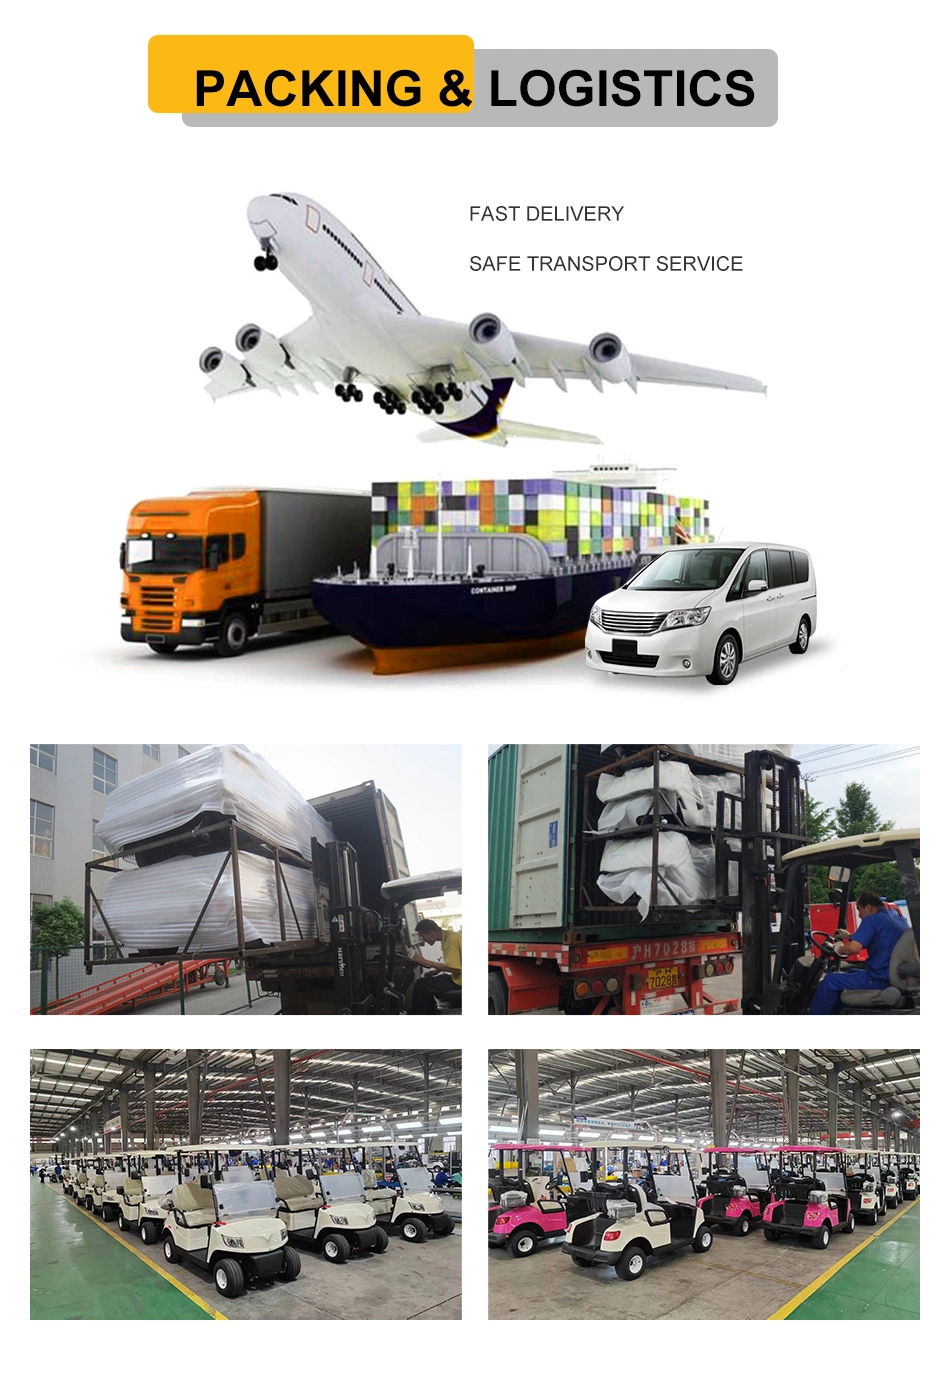 China Factory New Products 4 Wheel Cart 14 Seats Electric Mini Bus Sightseeing Shuttle Bus Wholesale Low Price for City School Transportation (DN-14M)